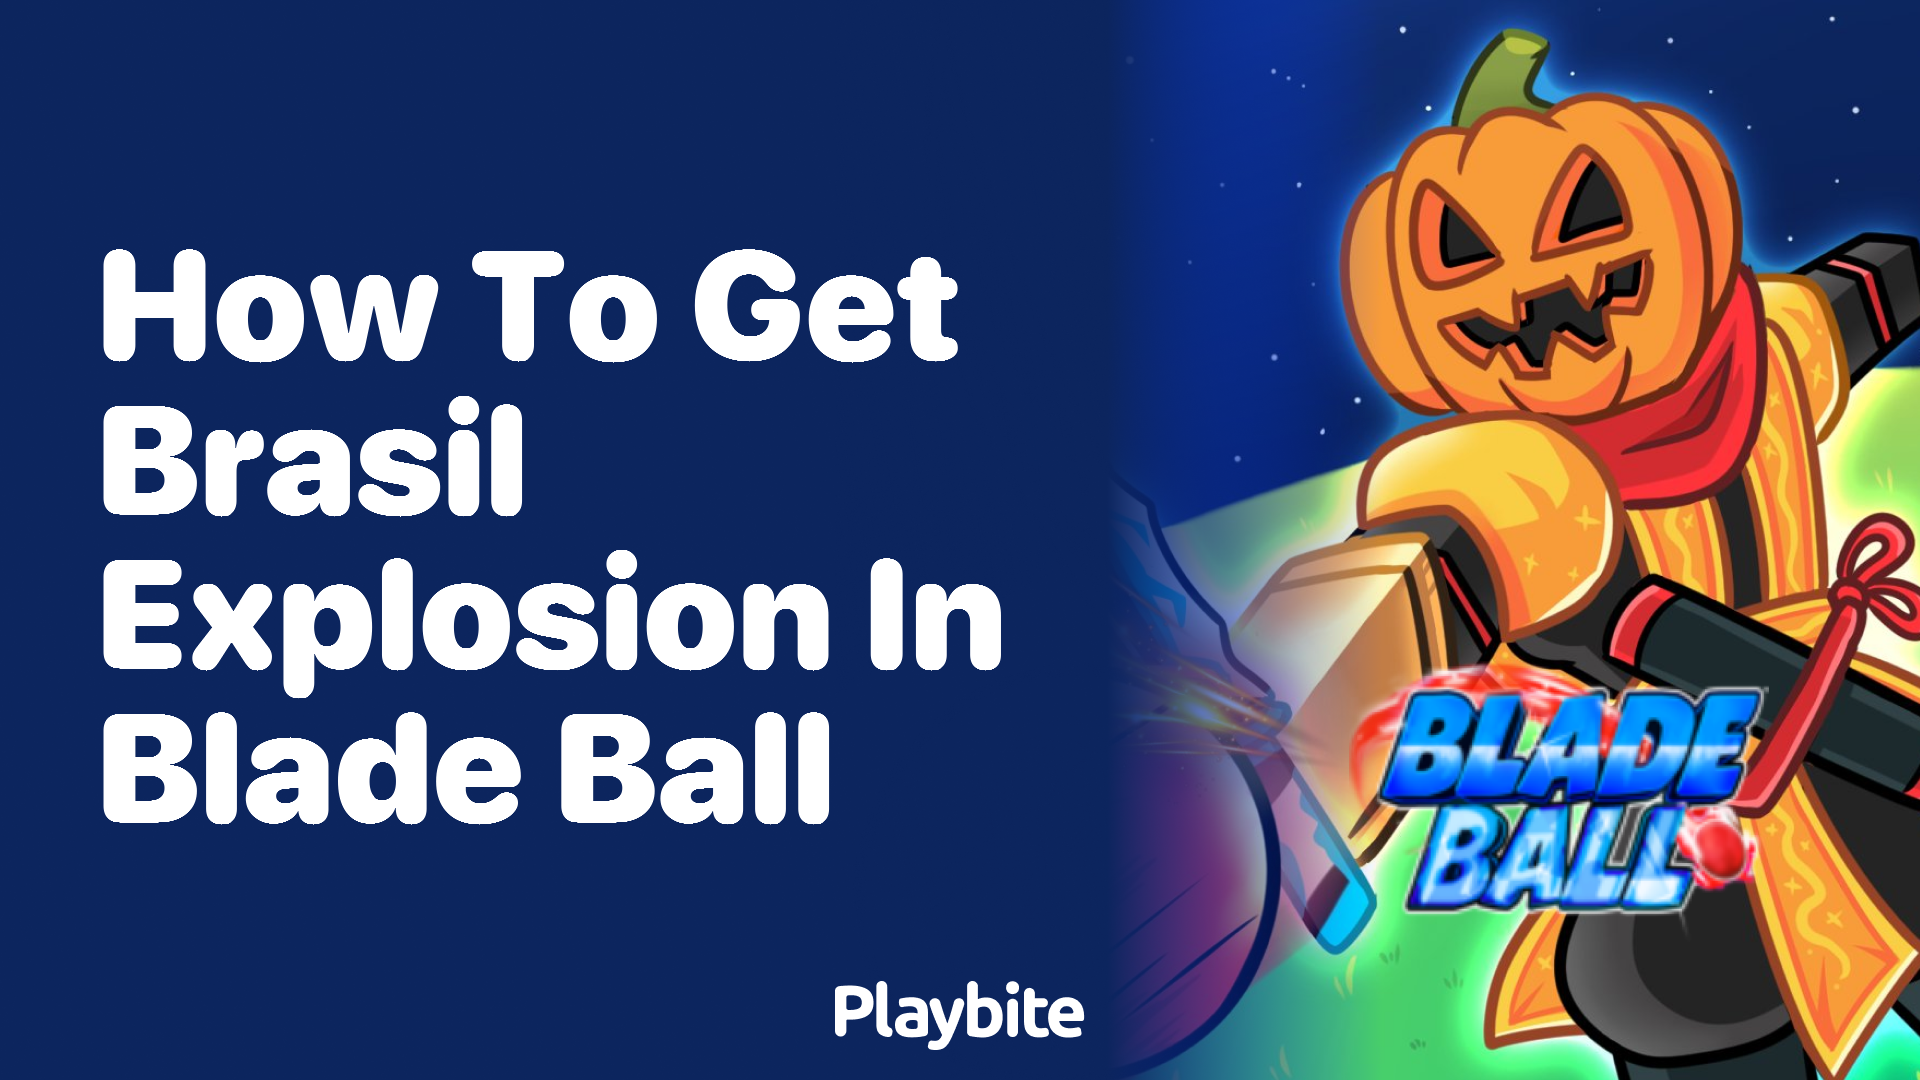 How to Get Brasil Explosion in Blade Ball